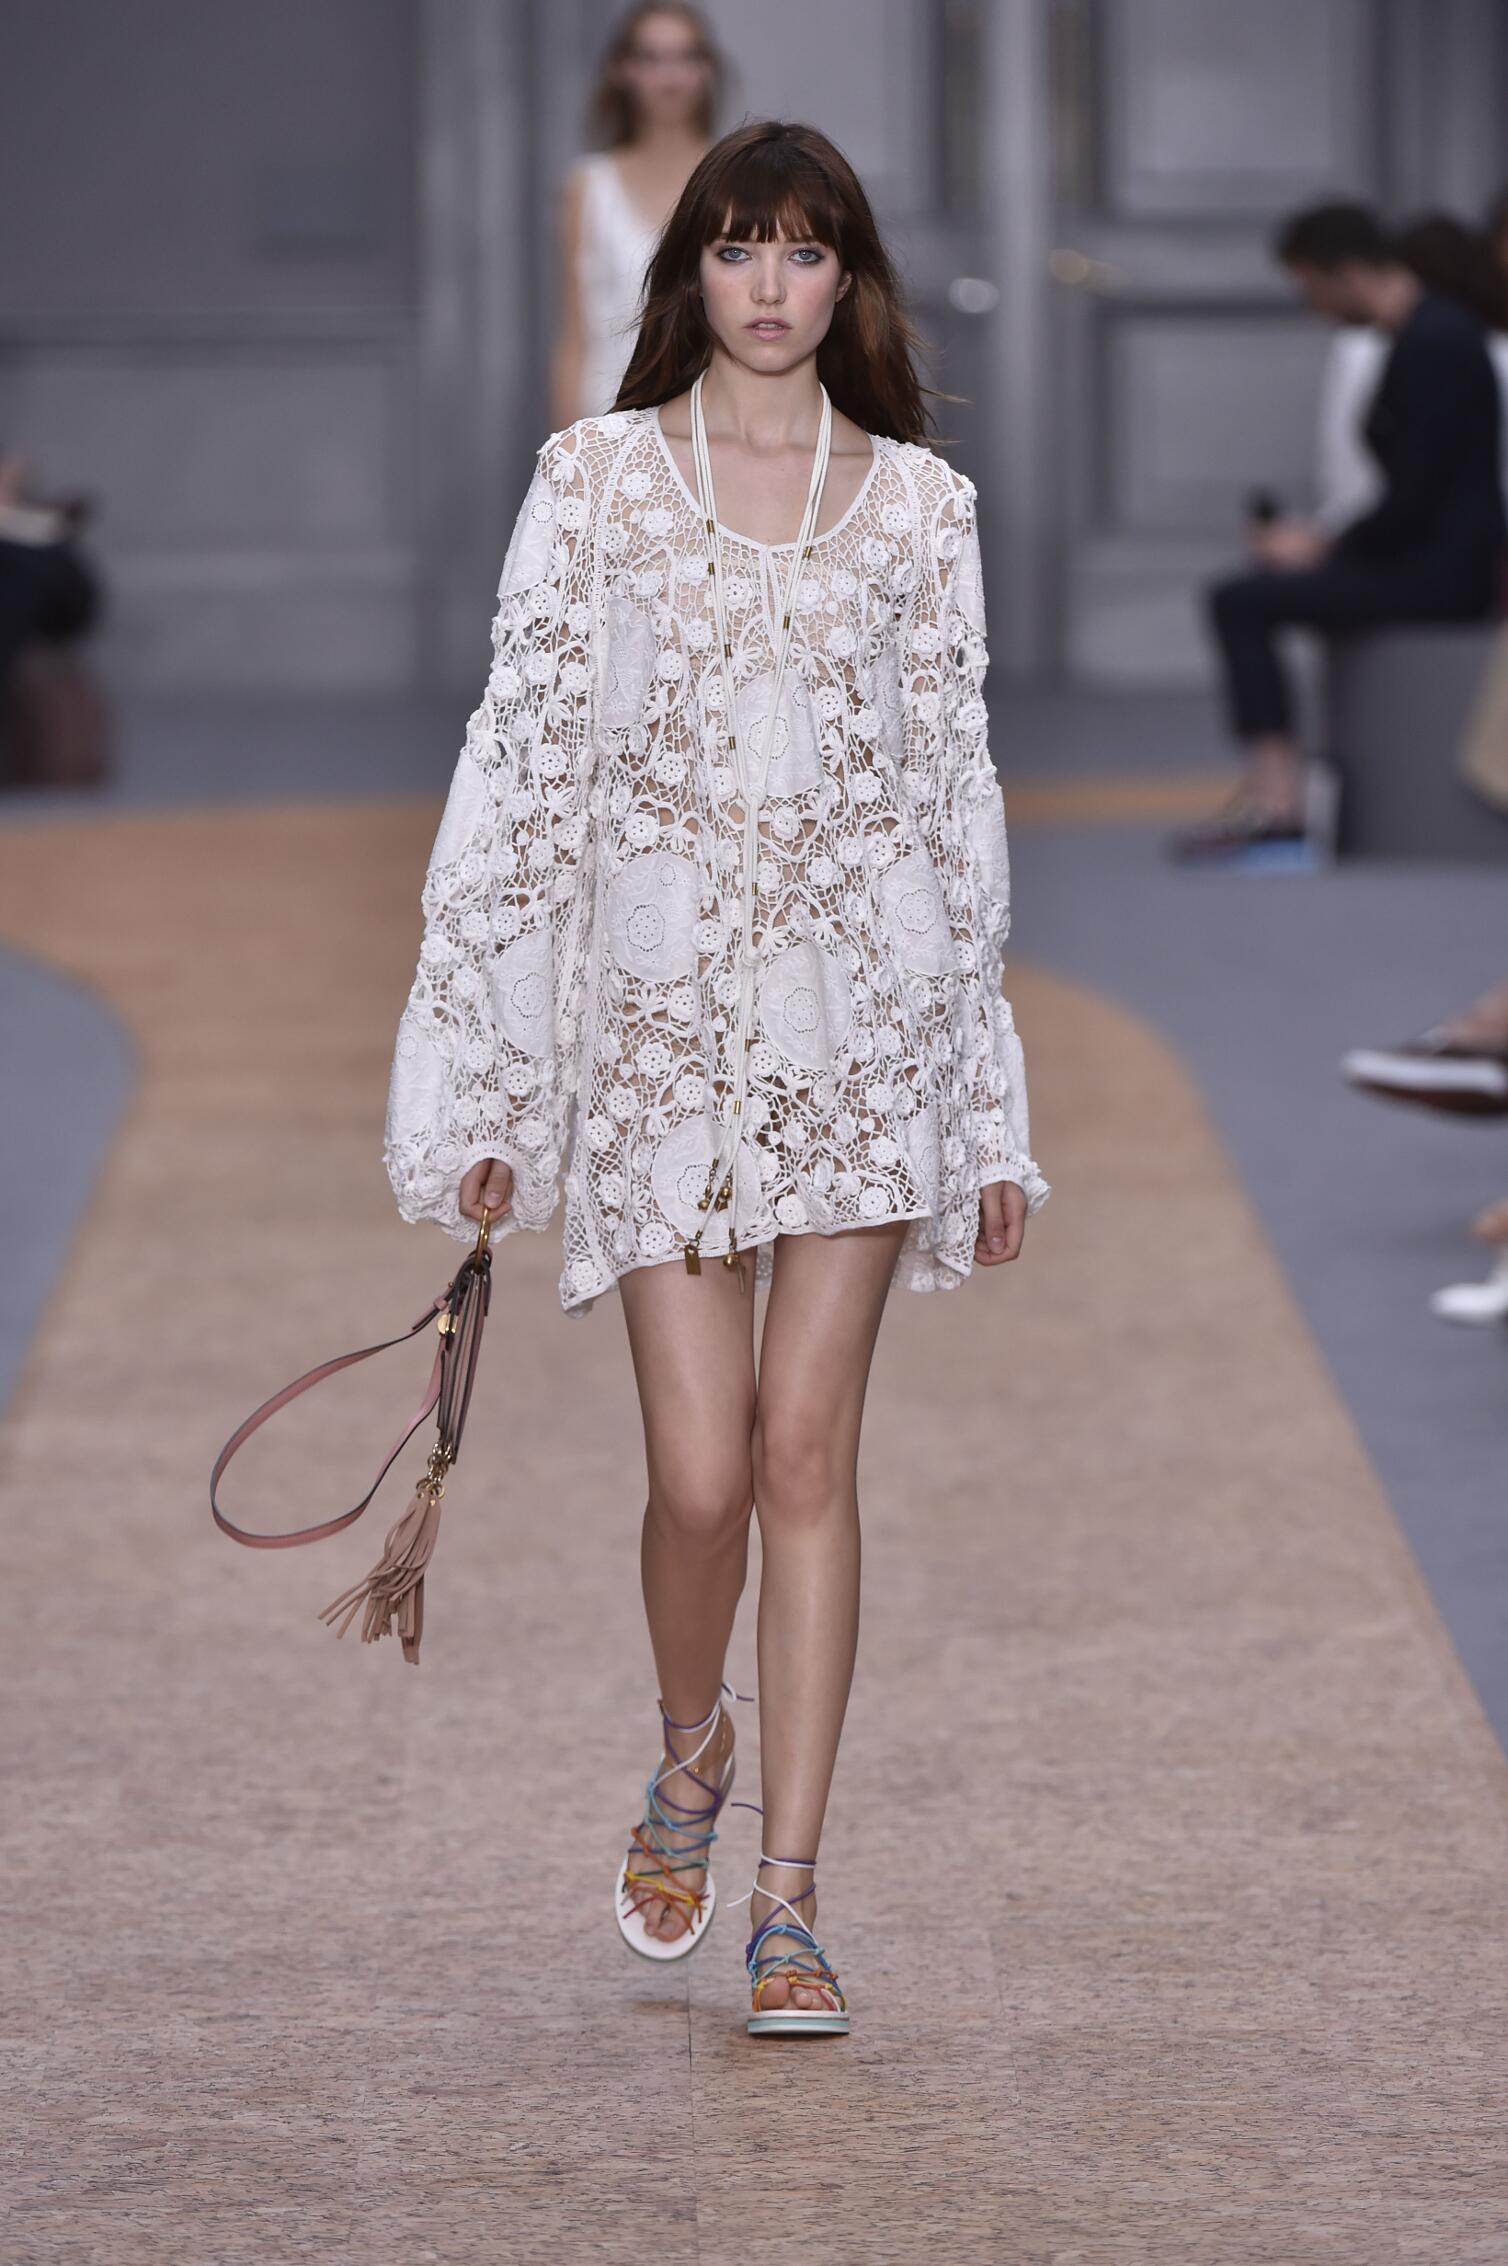 CHLOÉ SPRING SUMMER 2016 WOMEN'S COLLECTION | The Skinny Beep